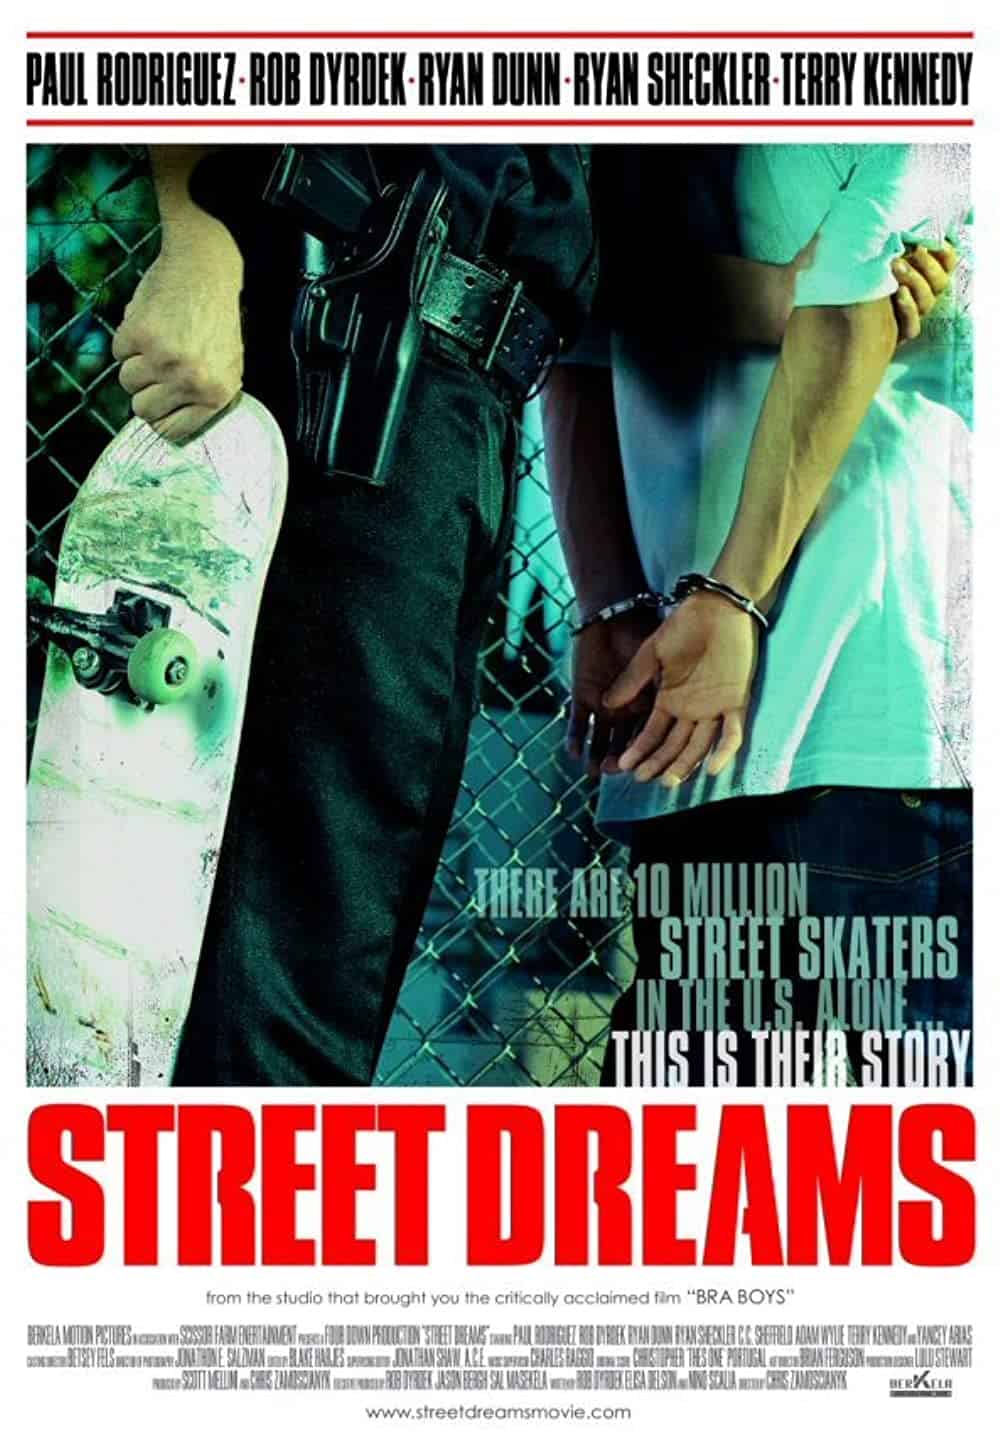 20 Best Skate Films to See This Weekend Street Dreams (2009) new latest